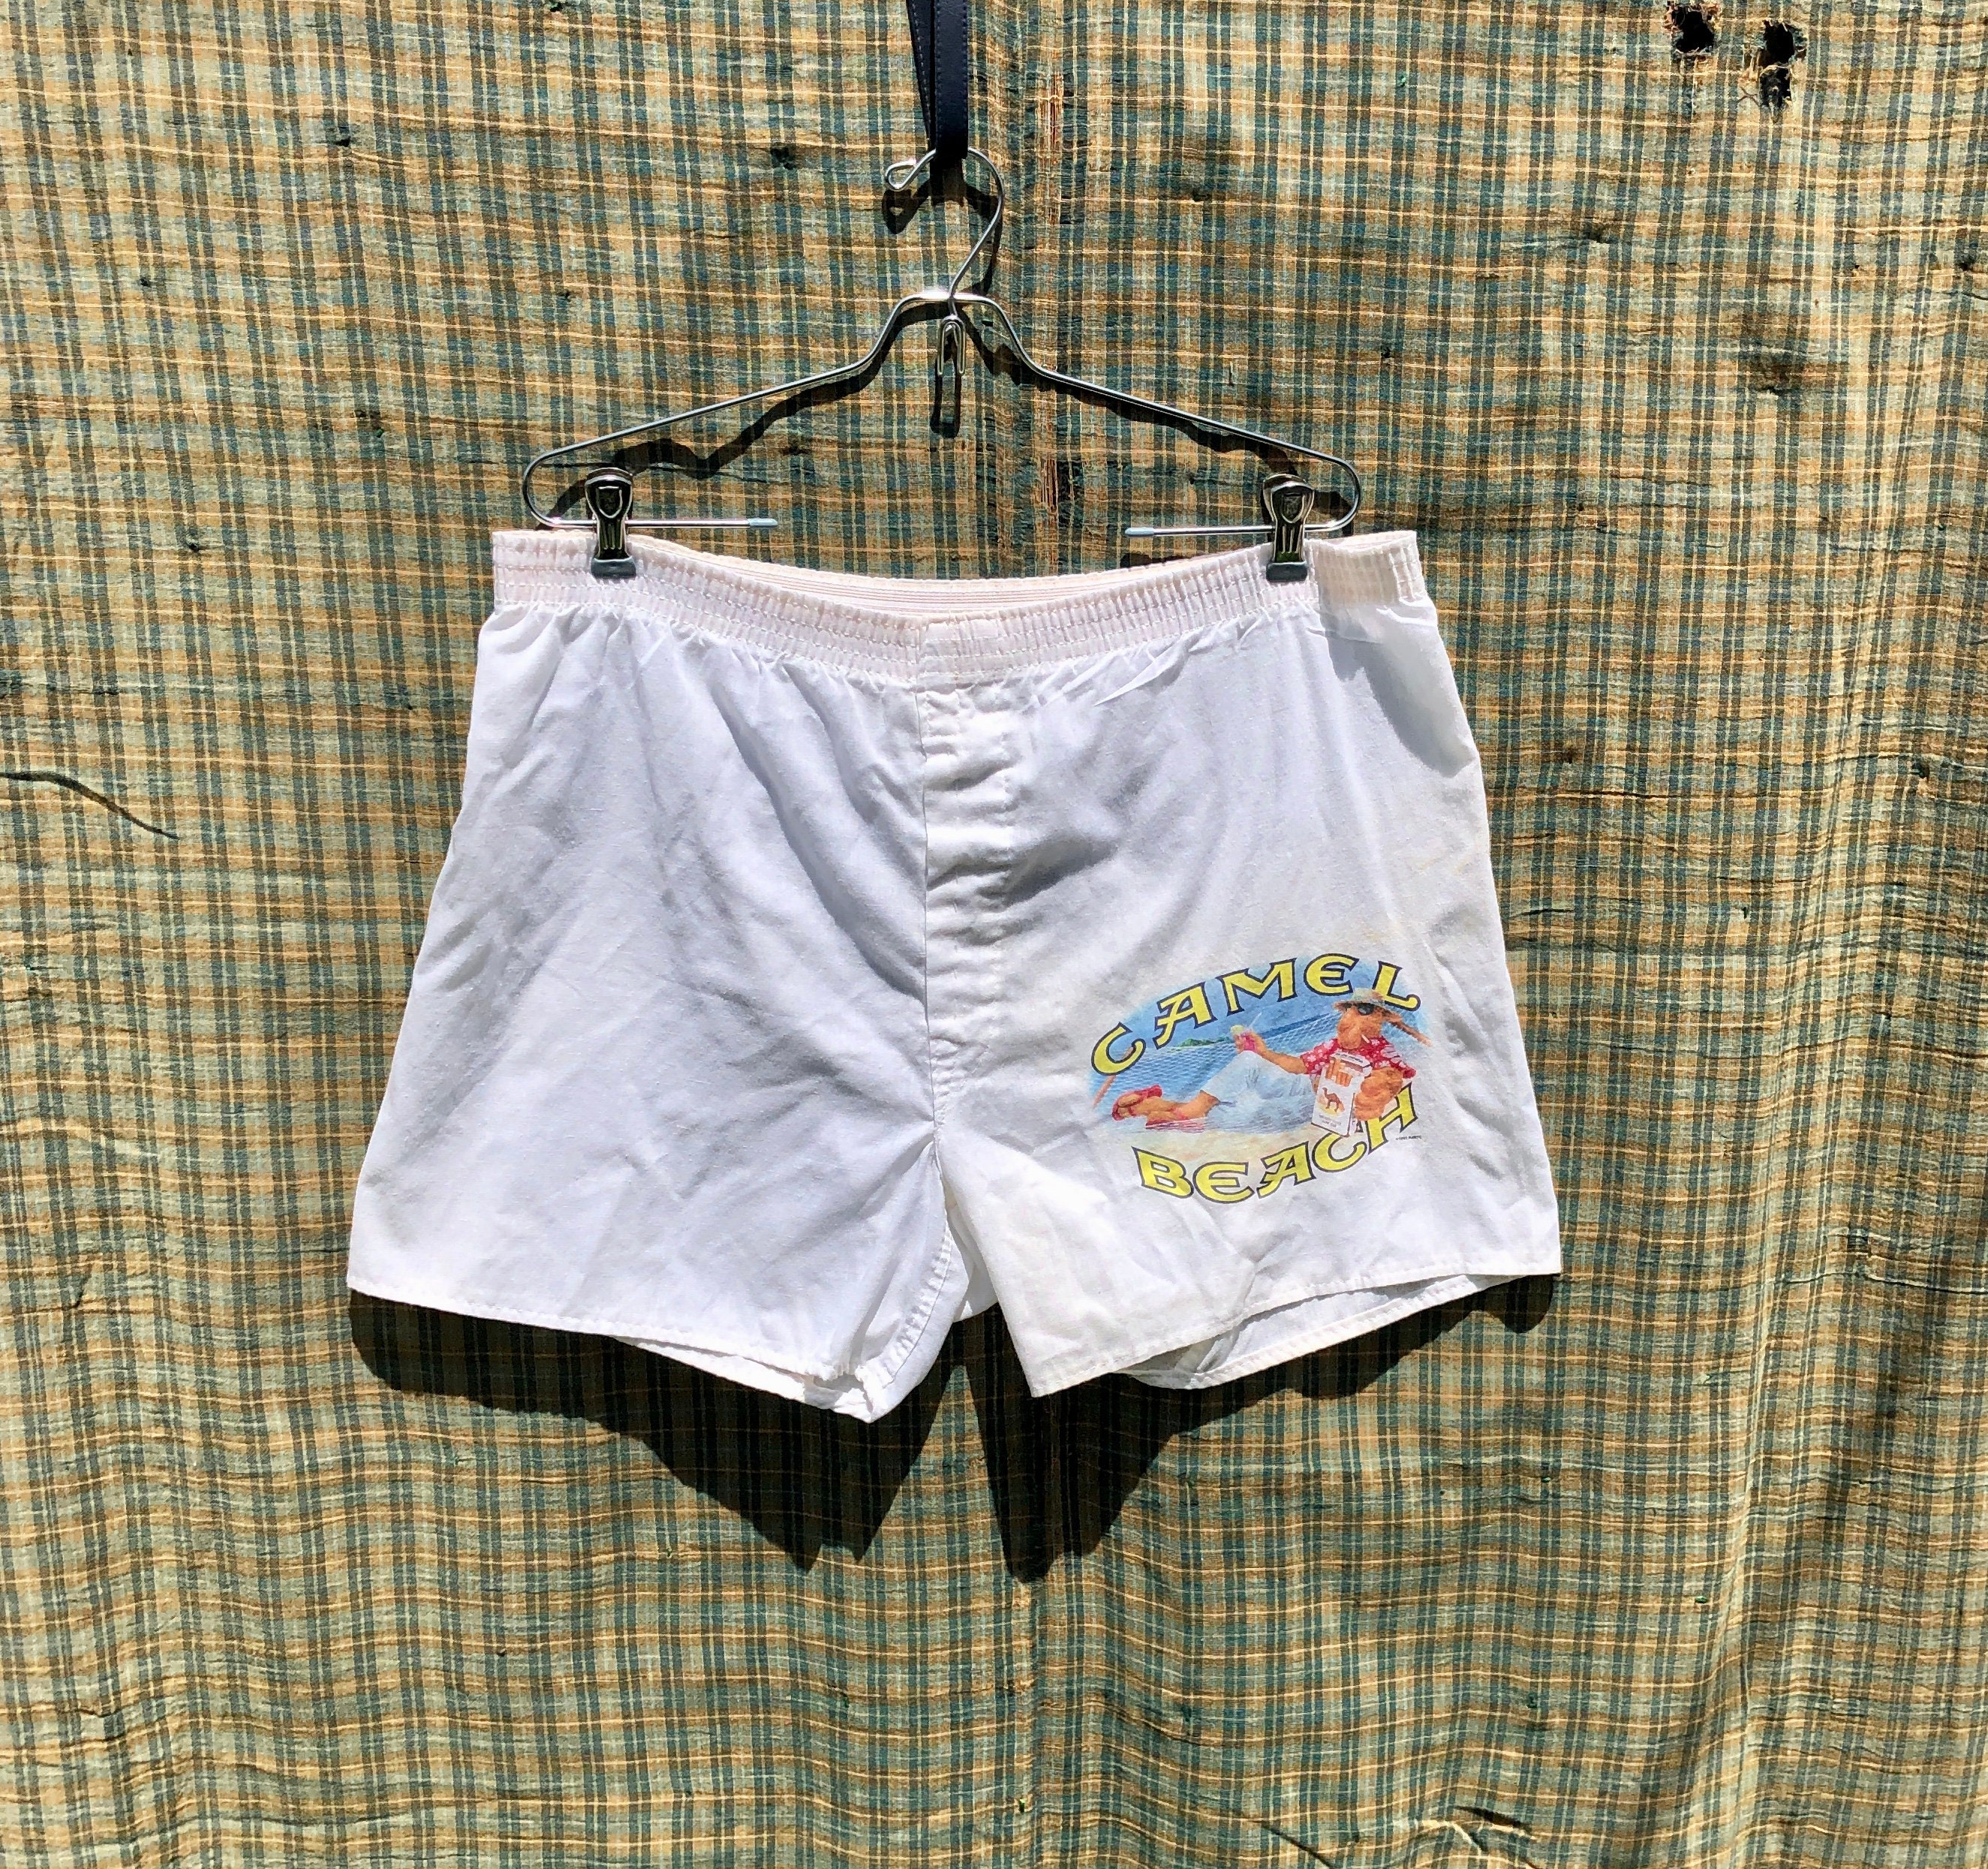 Vintage 1990s Joe Boxer catch of the Day Boxers -  Israel